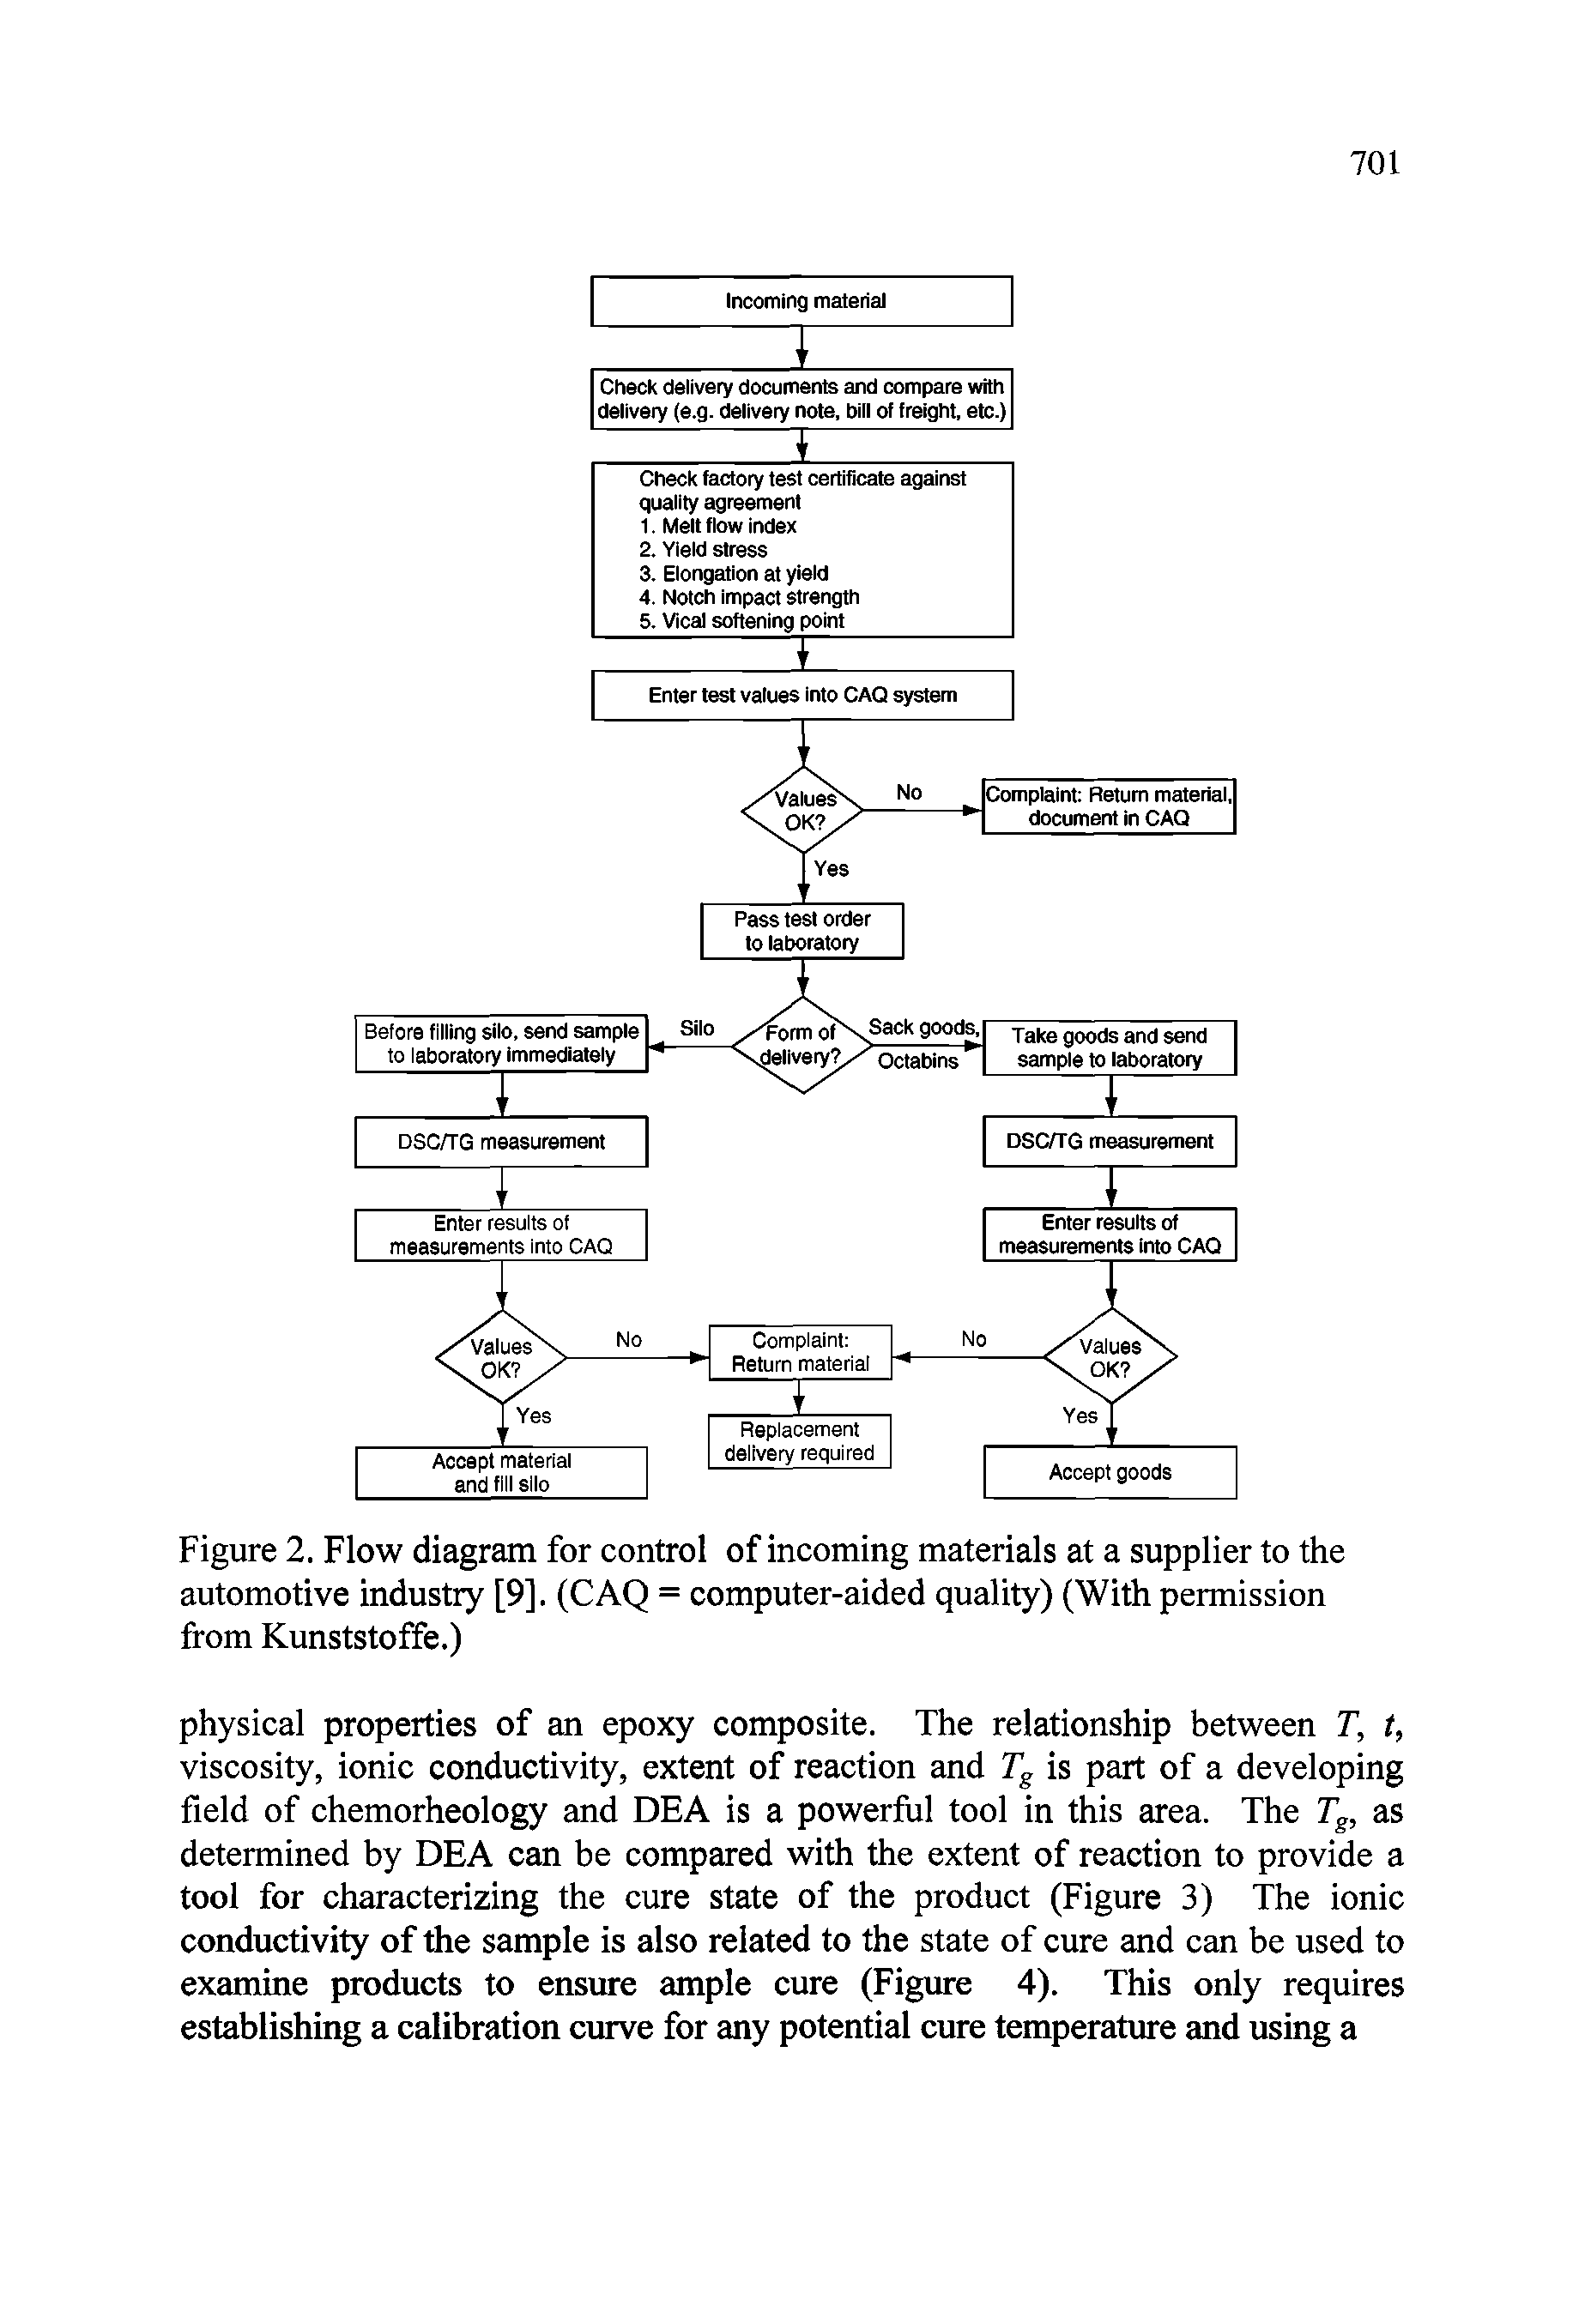 Figure 2. Flow diagram for control of incoming materials at a supplier to the automotive industry [9]. (CAQ = computer-aided quality) (With permission from Kunststoffe.)...